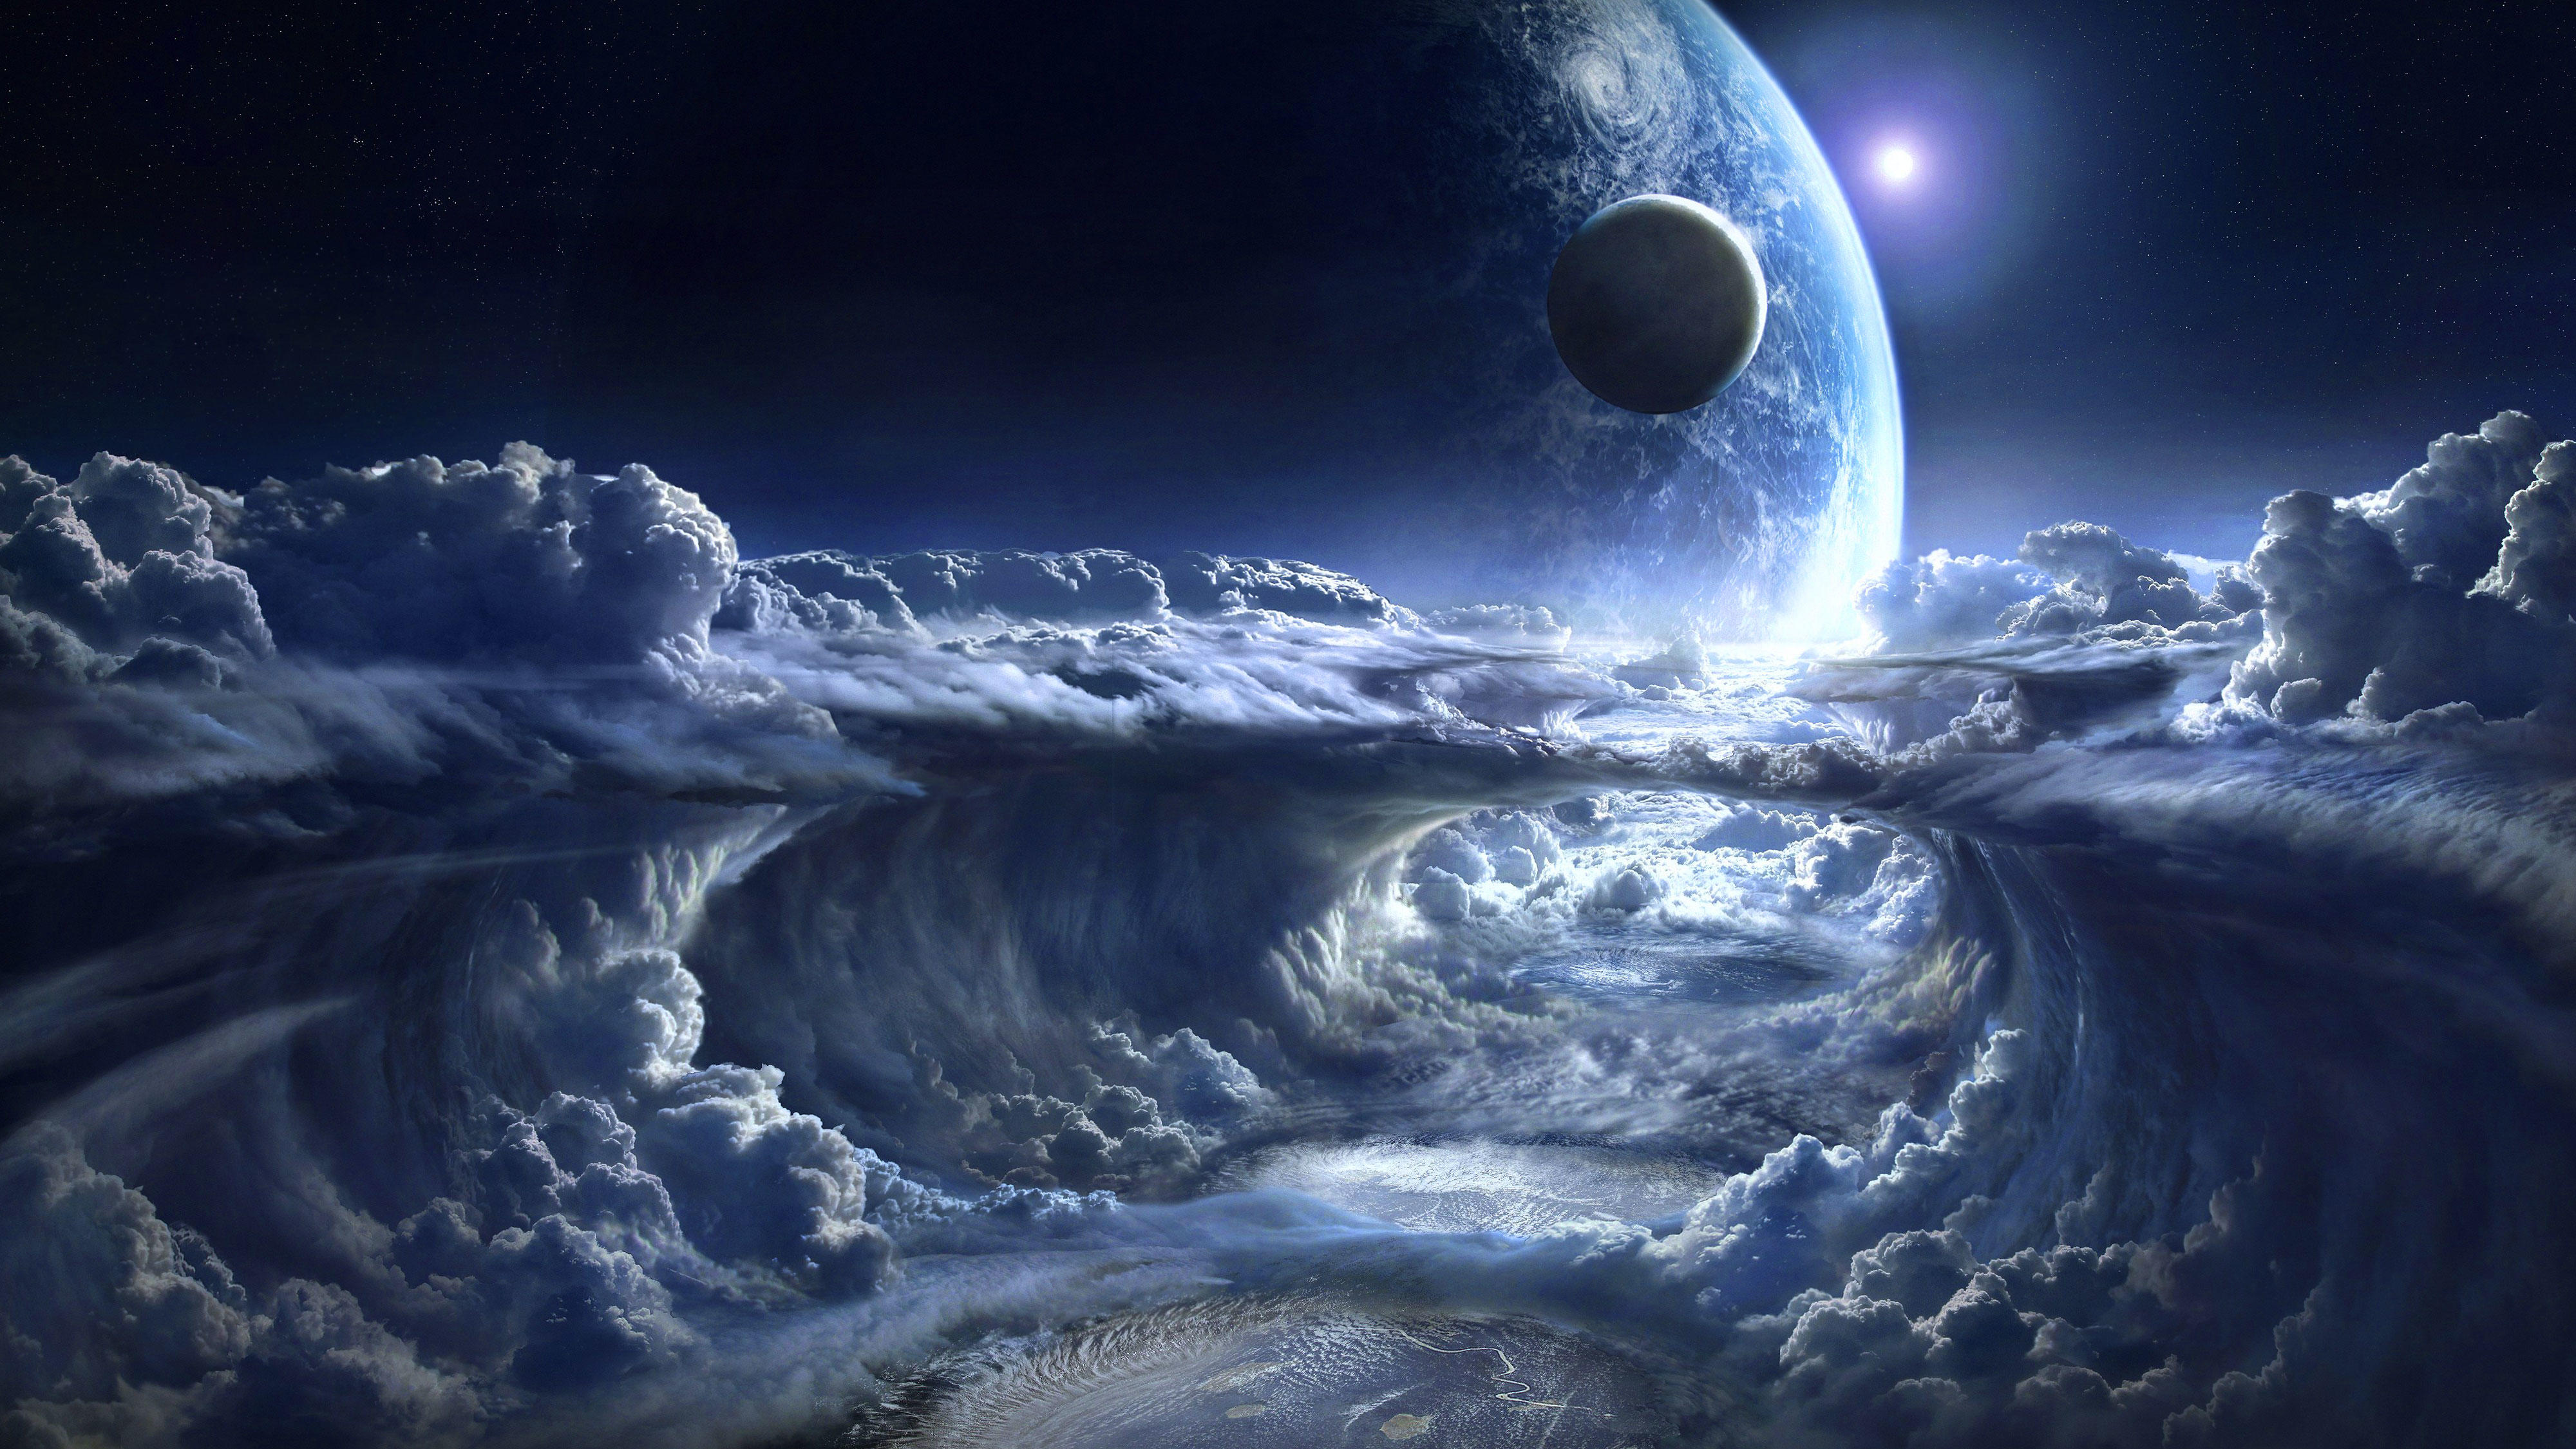 Wallpapers planet clouds vast expanses of space on the desktop